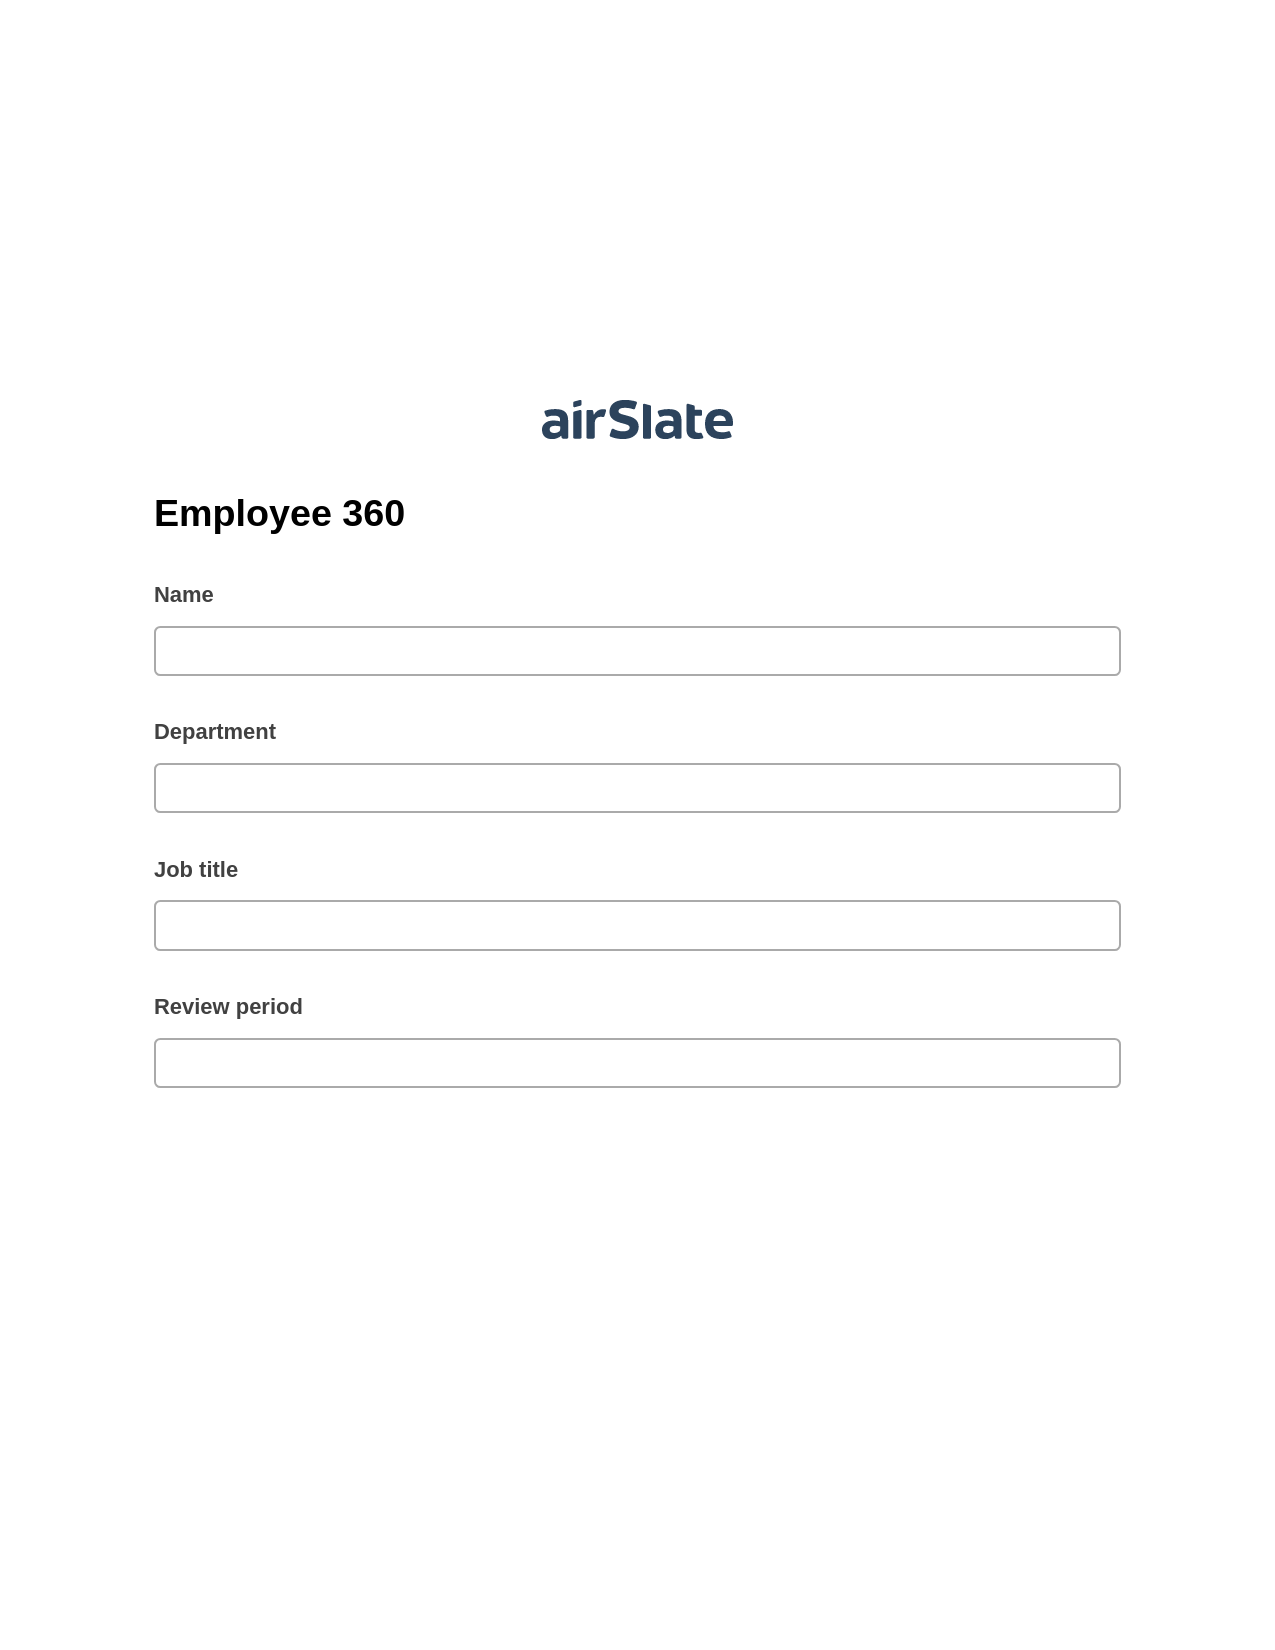 Multirole Employee 360 Pre-fill from another Slate Bot, Create MS Dynamics 365 Records Bot, Email Notification Postfinish Bot